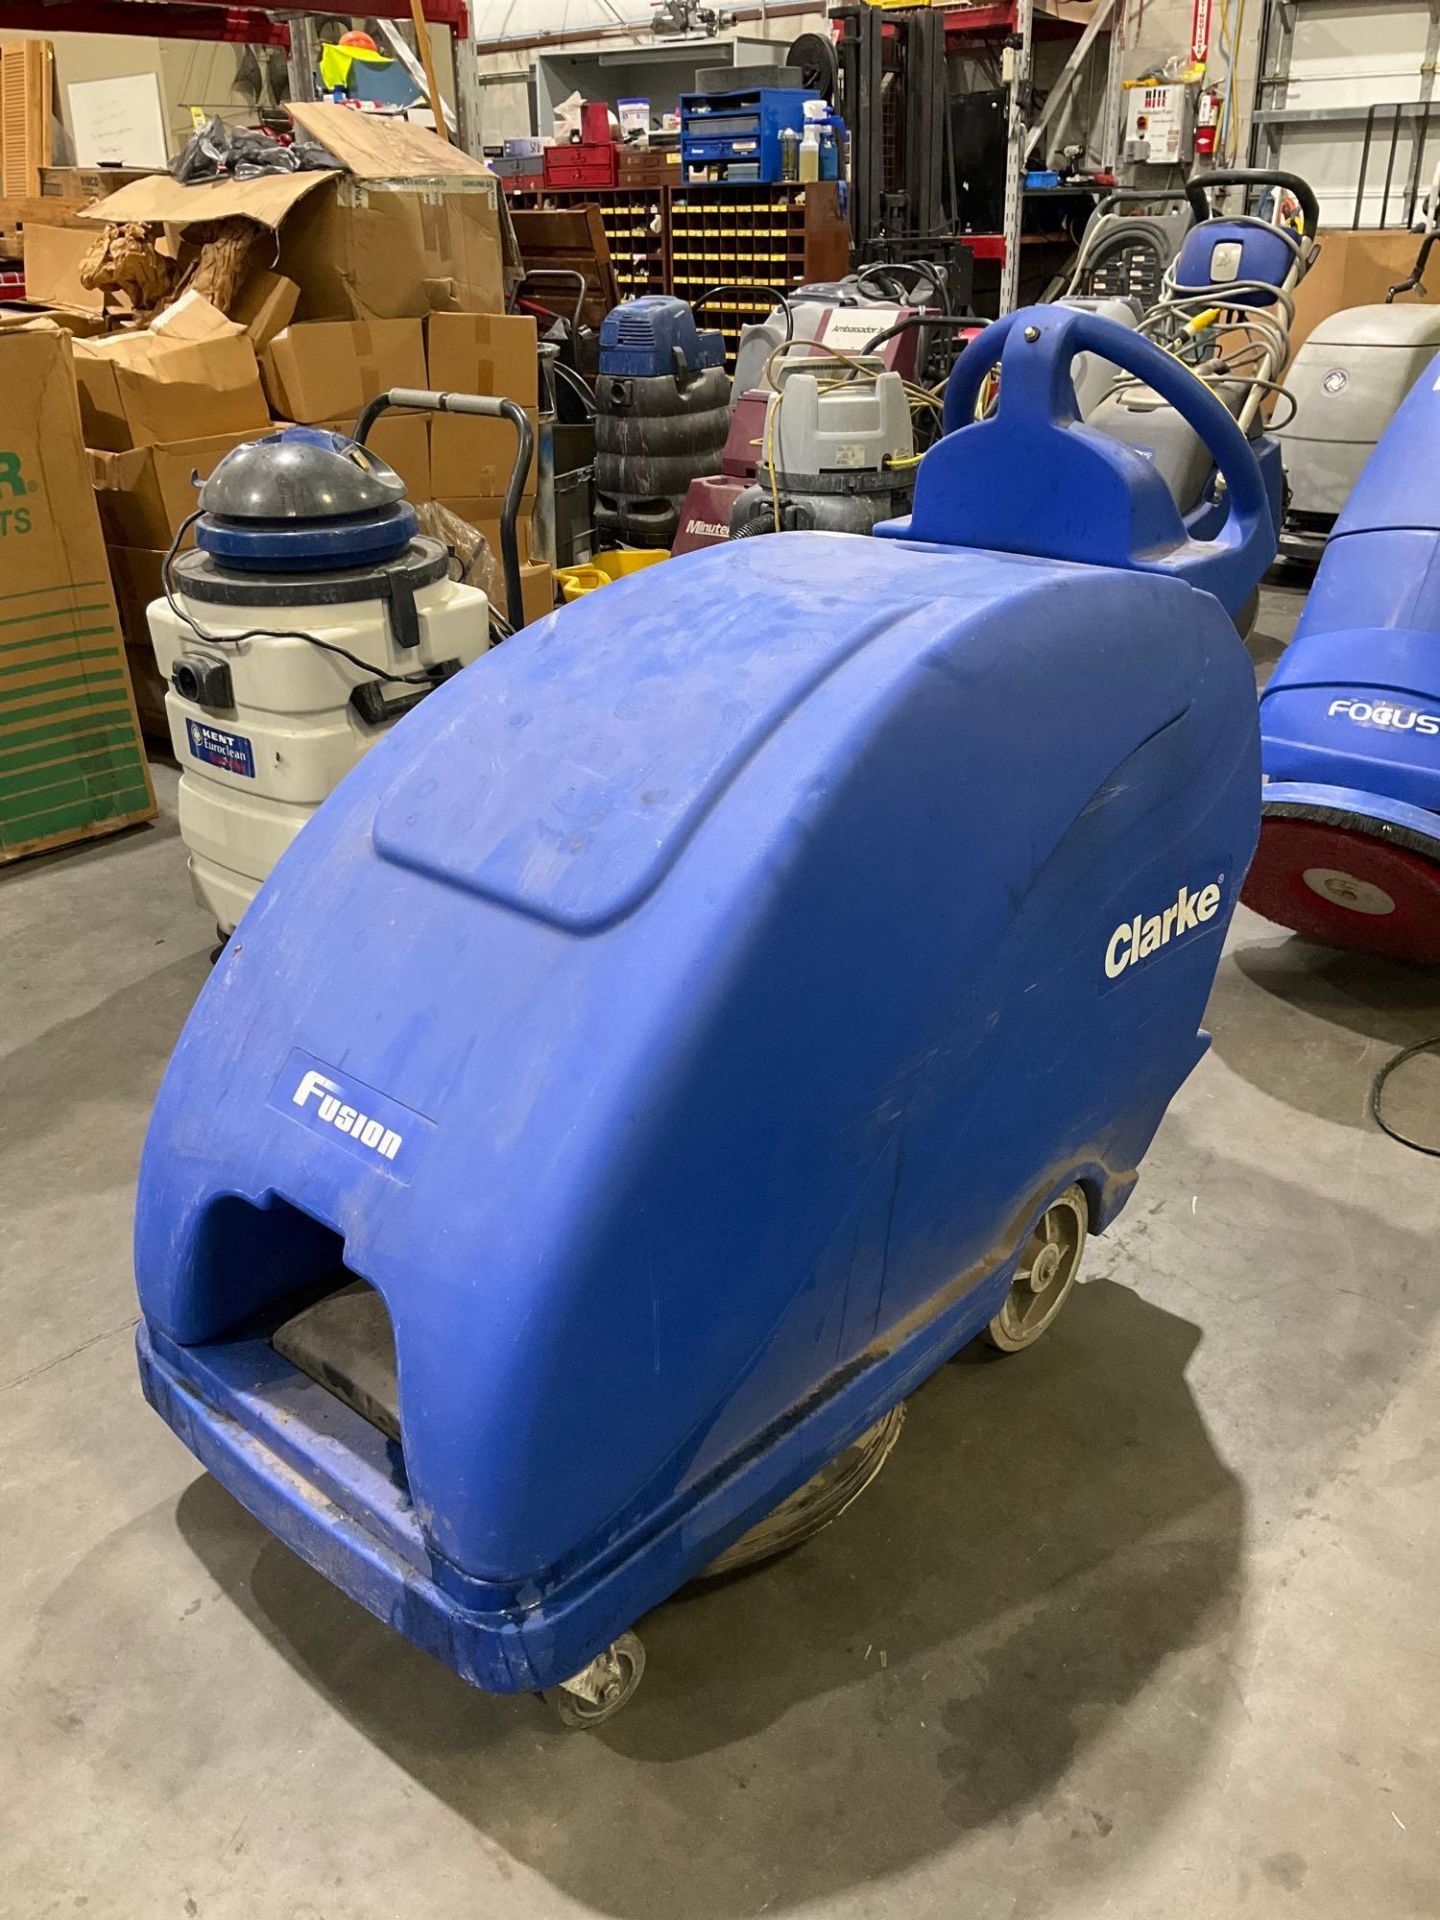 CLARKE WALK BEHIND FLOOR BURNISHER MODEL FUSION 20T 195 AH, ELECTRIC, APPROX 36 VOLTS, NEW BATTERIES